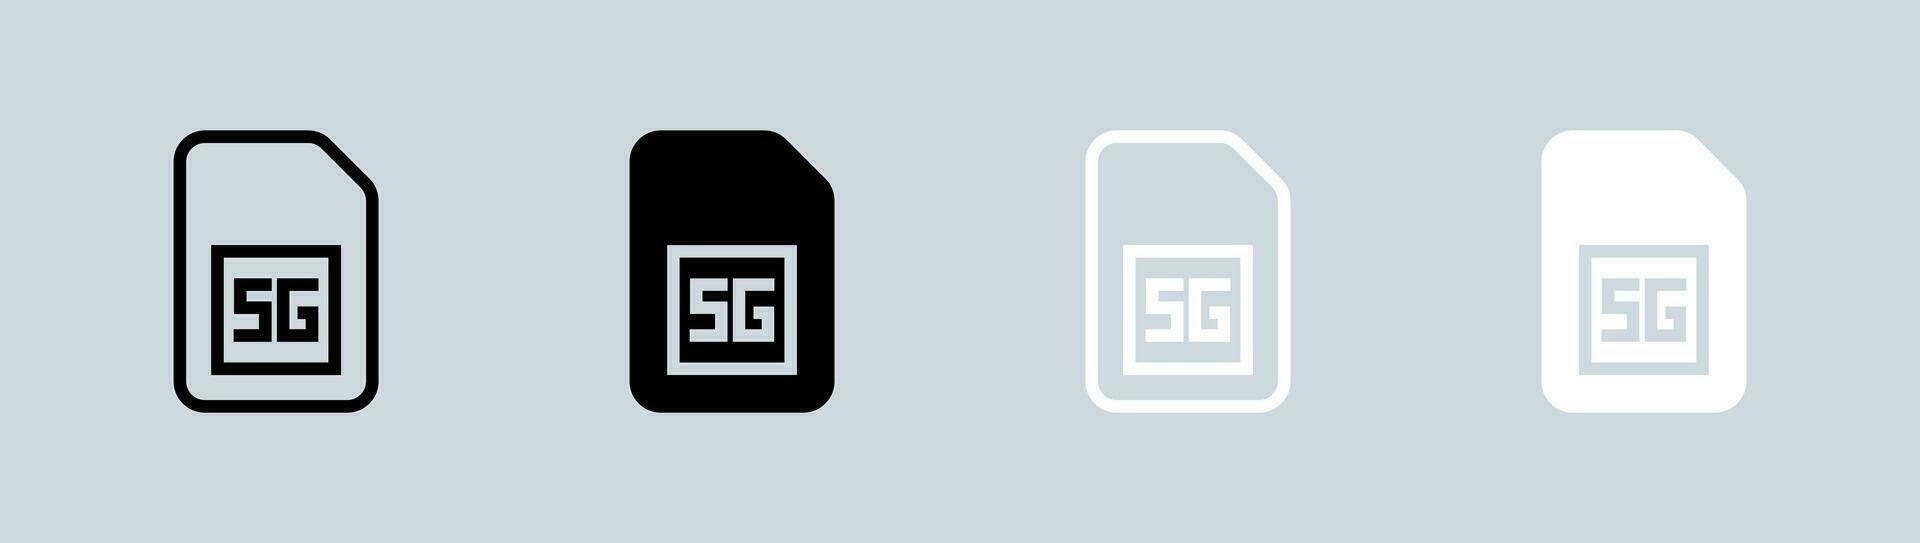 5 generation icon set in black and white. Network signs vector illustration.